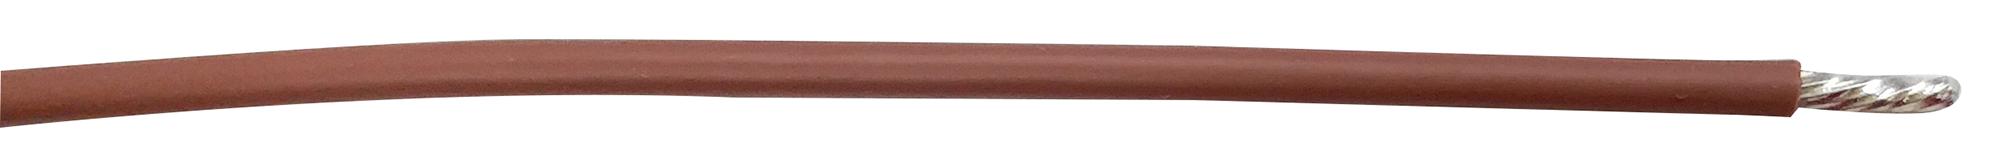 PP002585 CABLE WIRE, 22AWG, BROWN, 305M PRO POWER